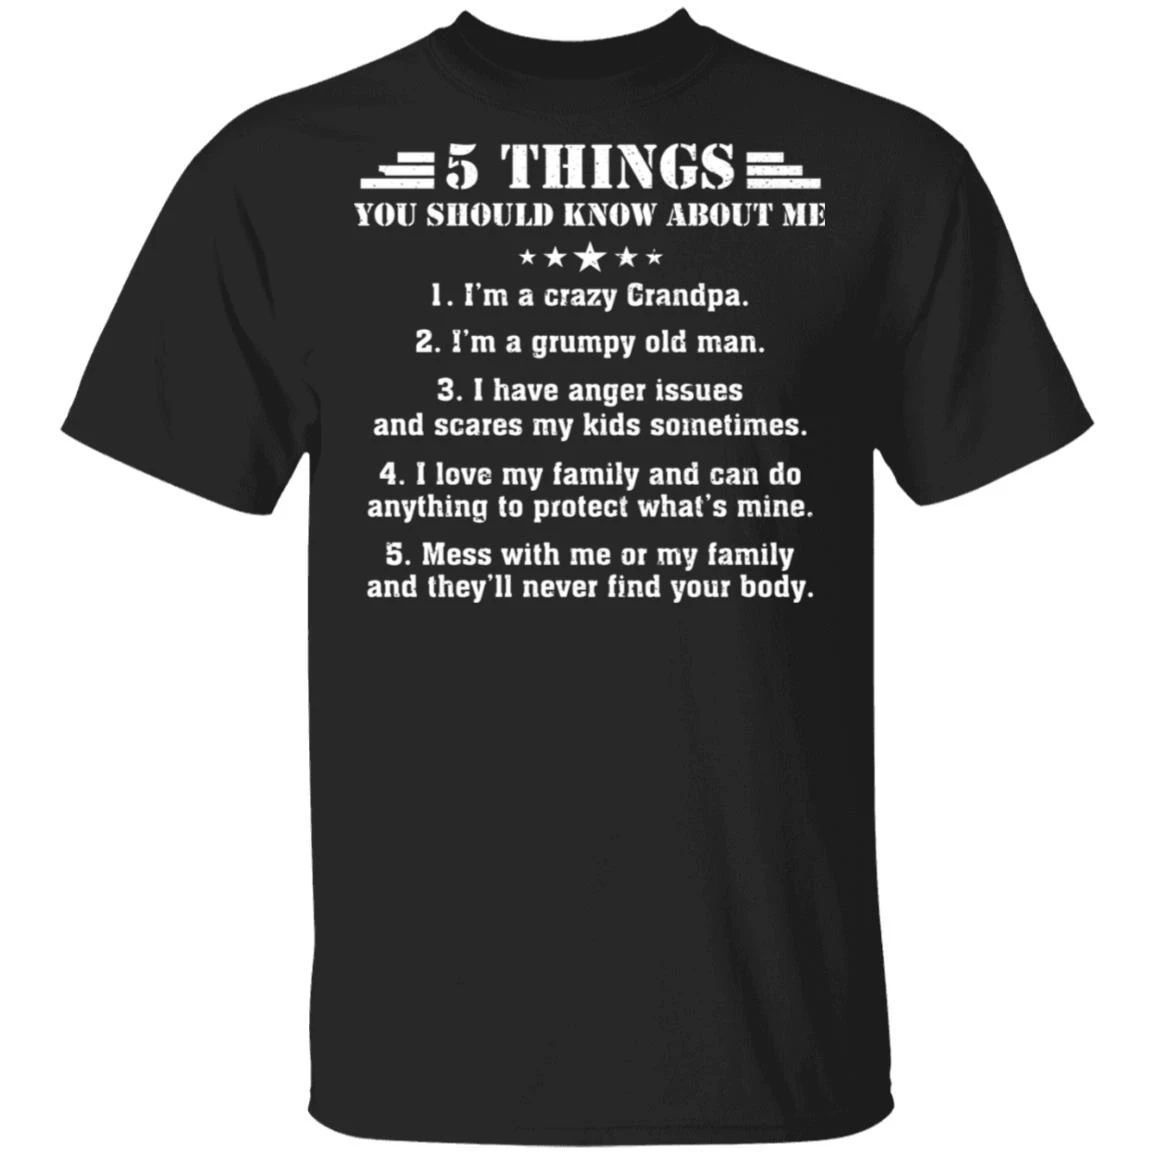 5 Things You Should Know About Me Grandpa T-shirt